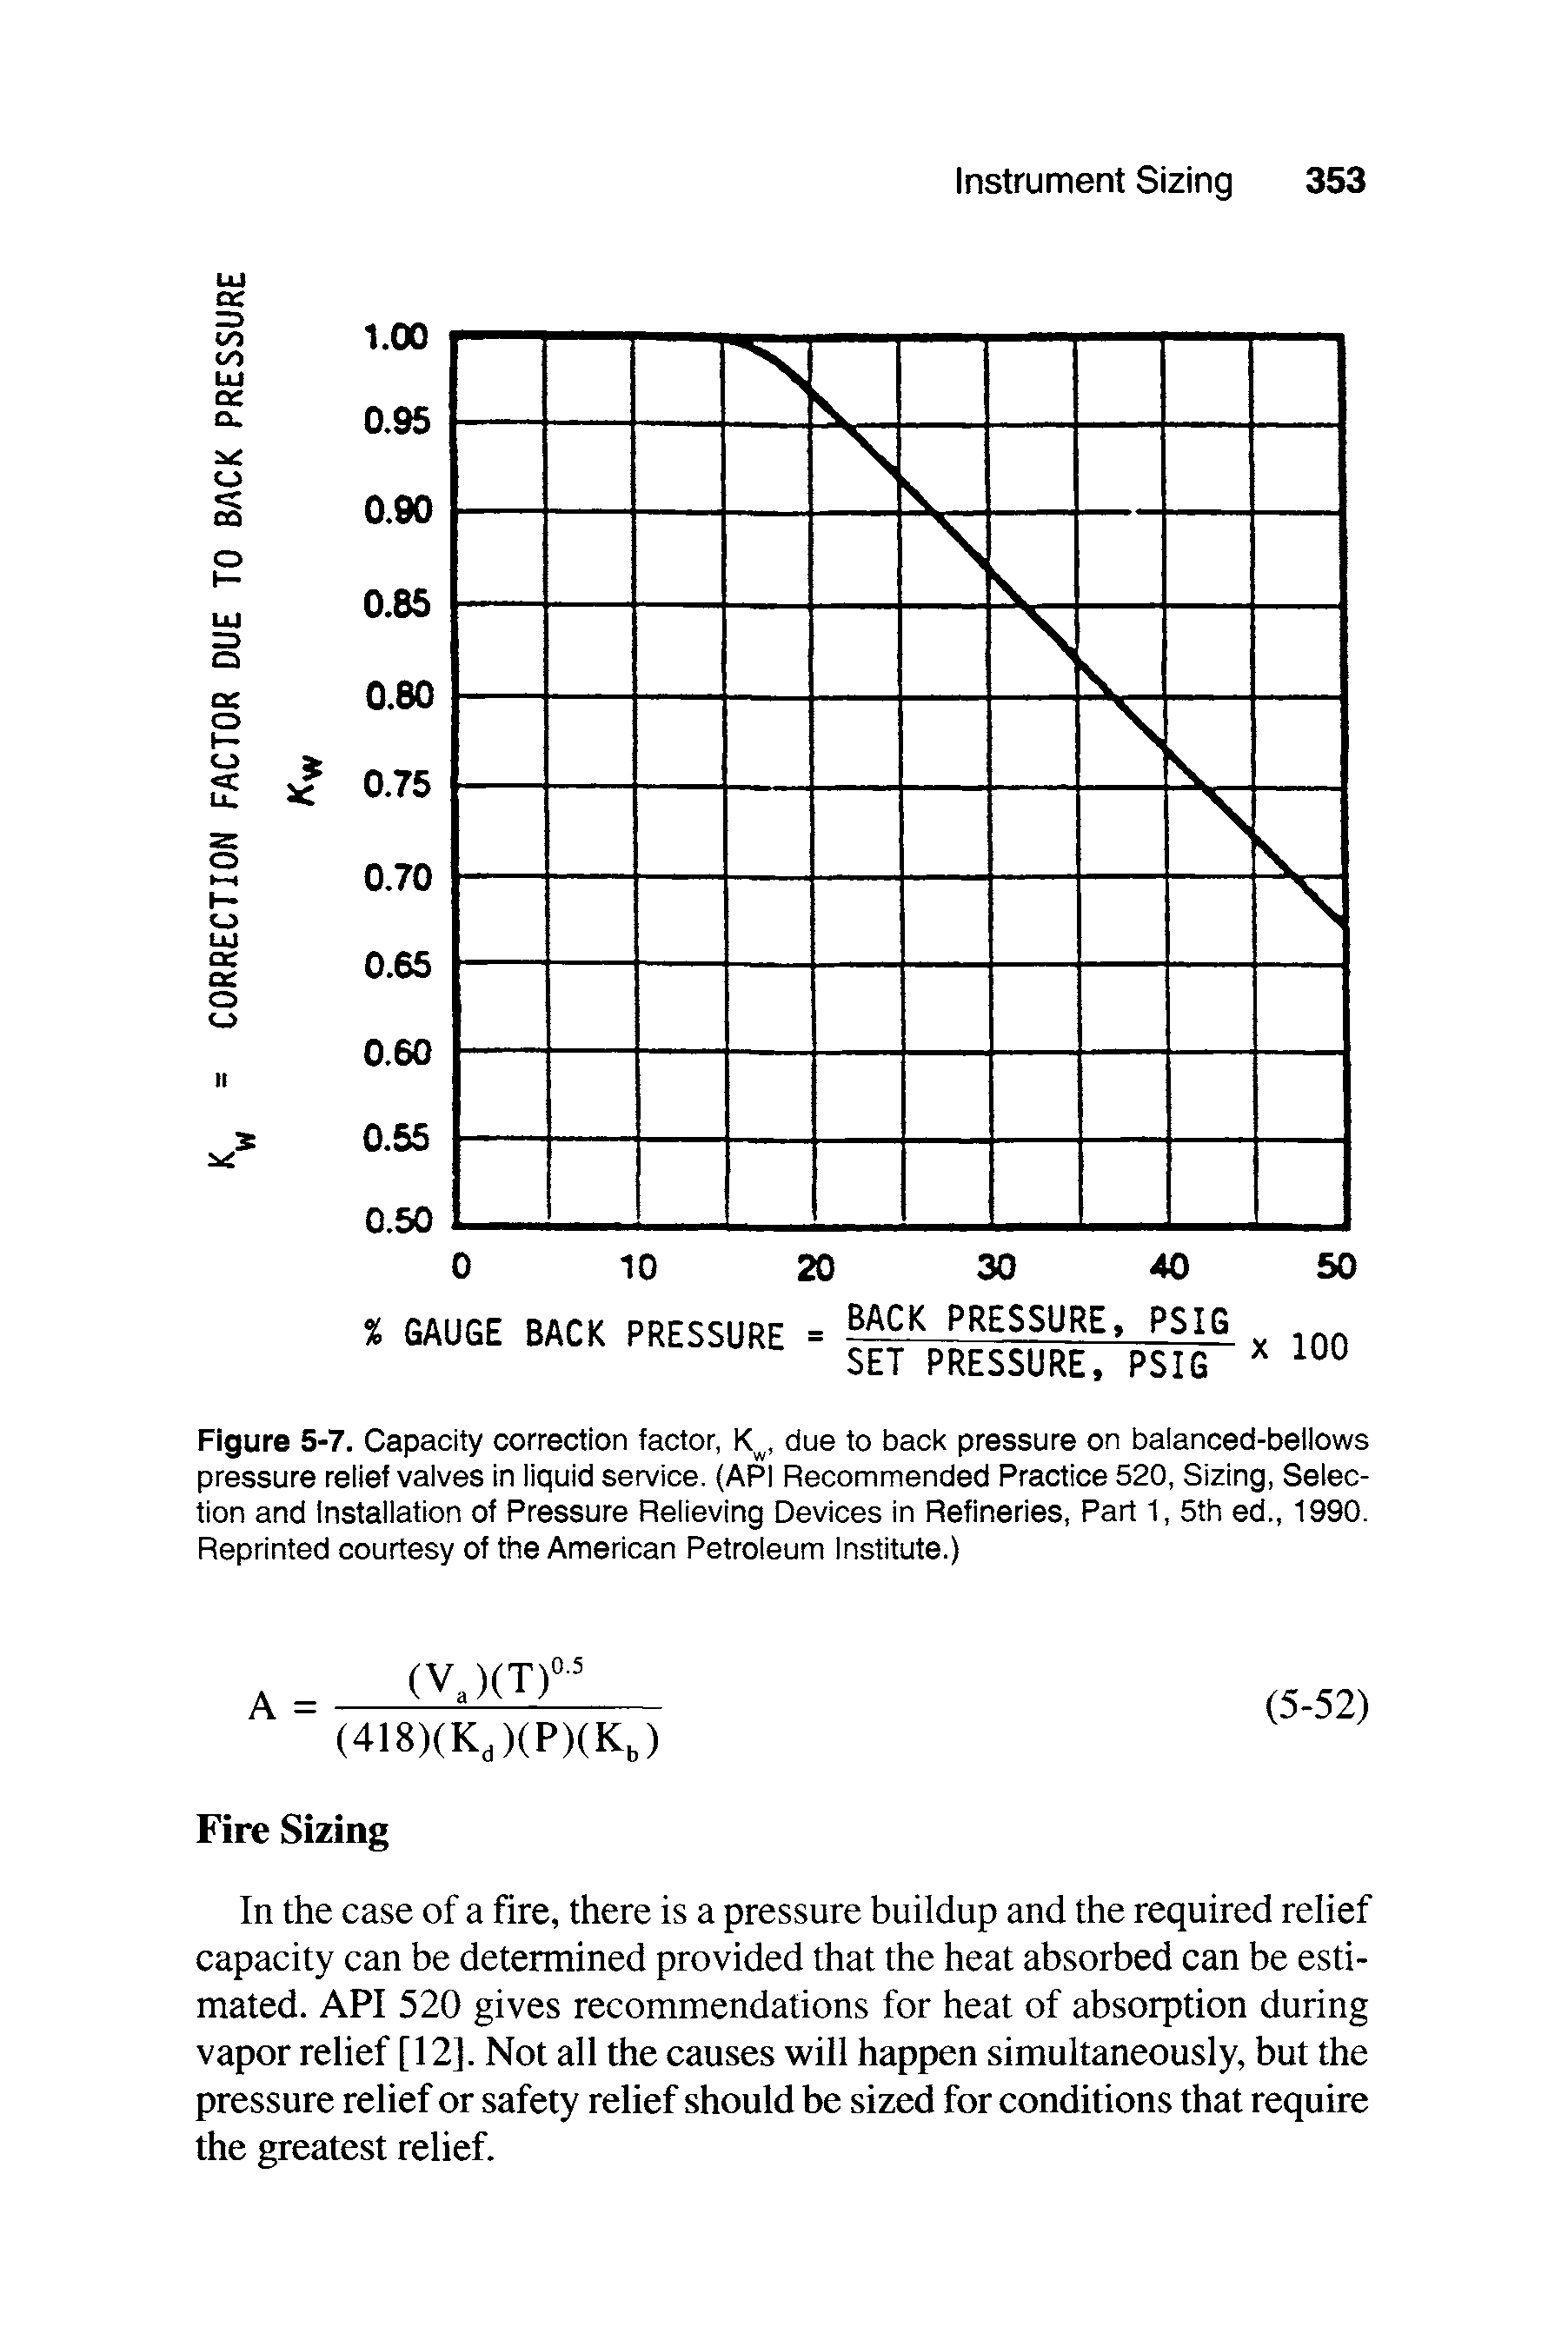 Figure 5-7. Capacity correction factor, K, due to back pressure on balanced-bellows pressure relief valves in liquid service. (API Recommended Practice 520, Sizing, Selection and Installation of Pressure Relieving Devices in Refineries, Part 1, 5th ed., 1990. Reprinted courtesy of the American Petroleum Institute.)...